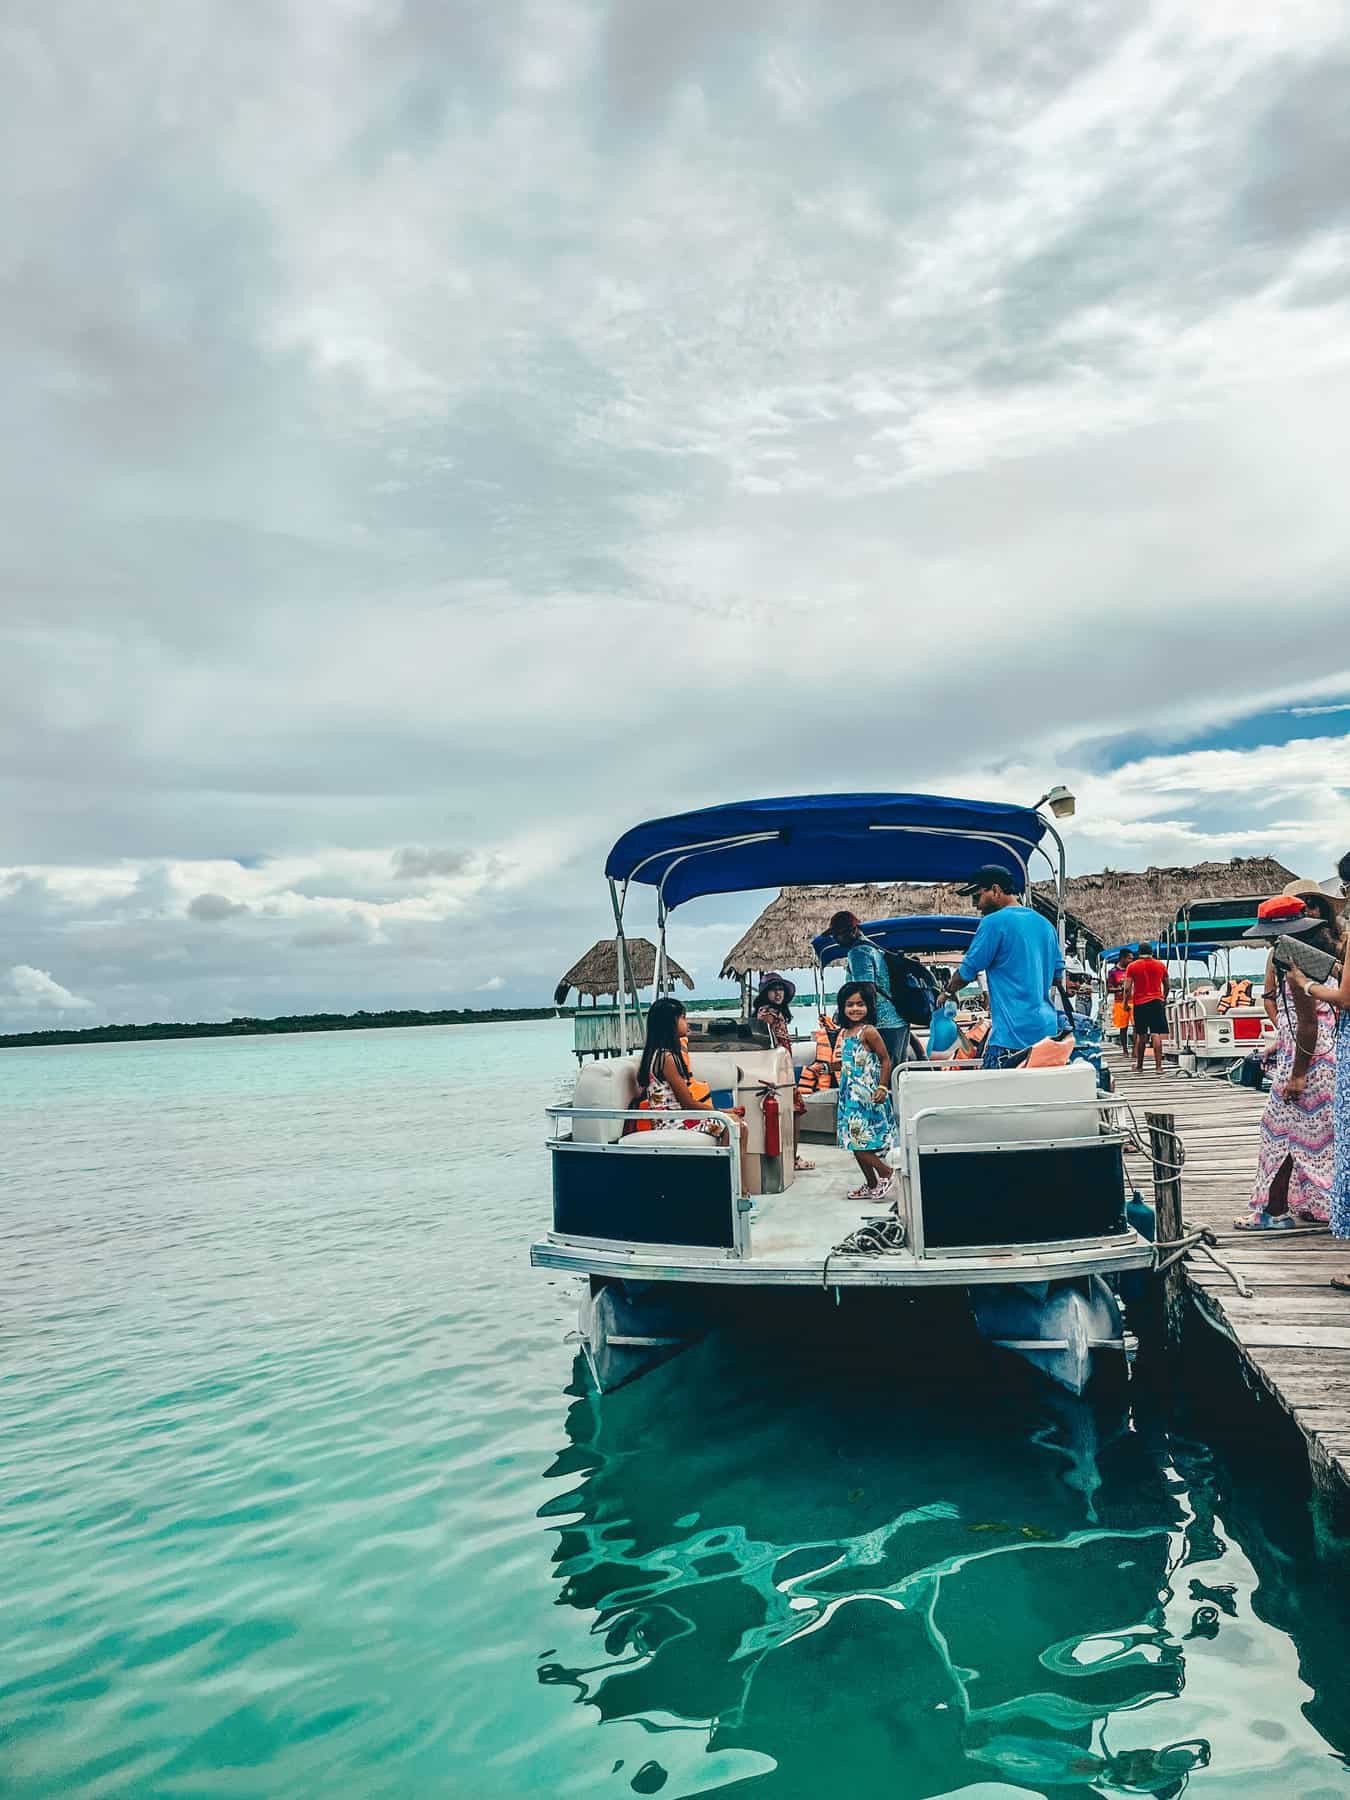 Boat at dock for tour of Bacalar Lagoon in Mexico